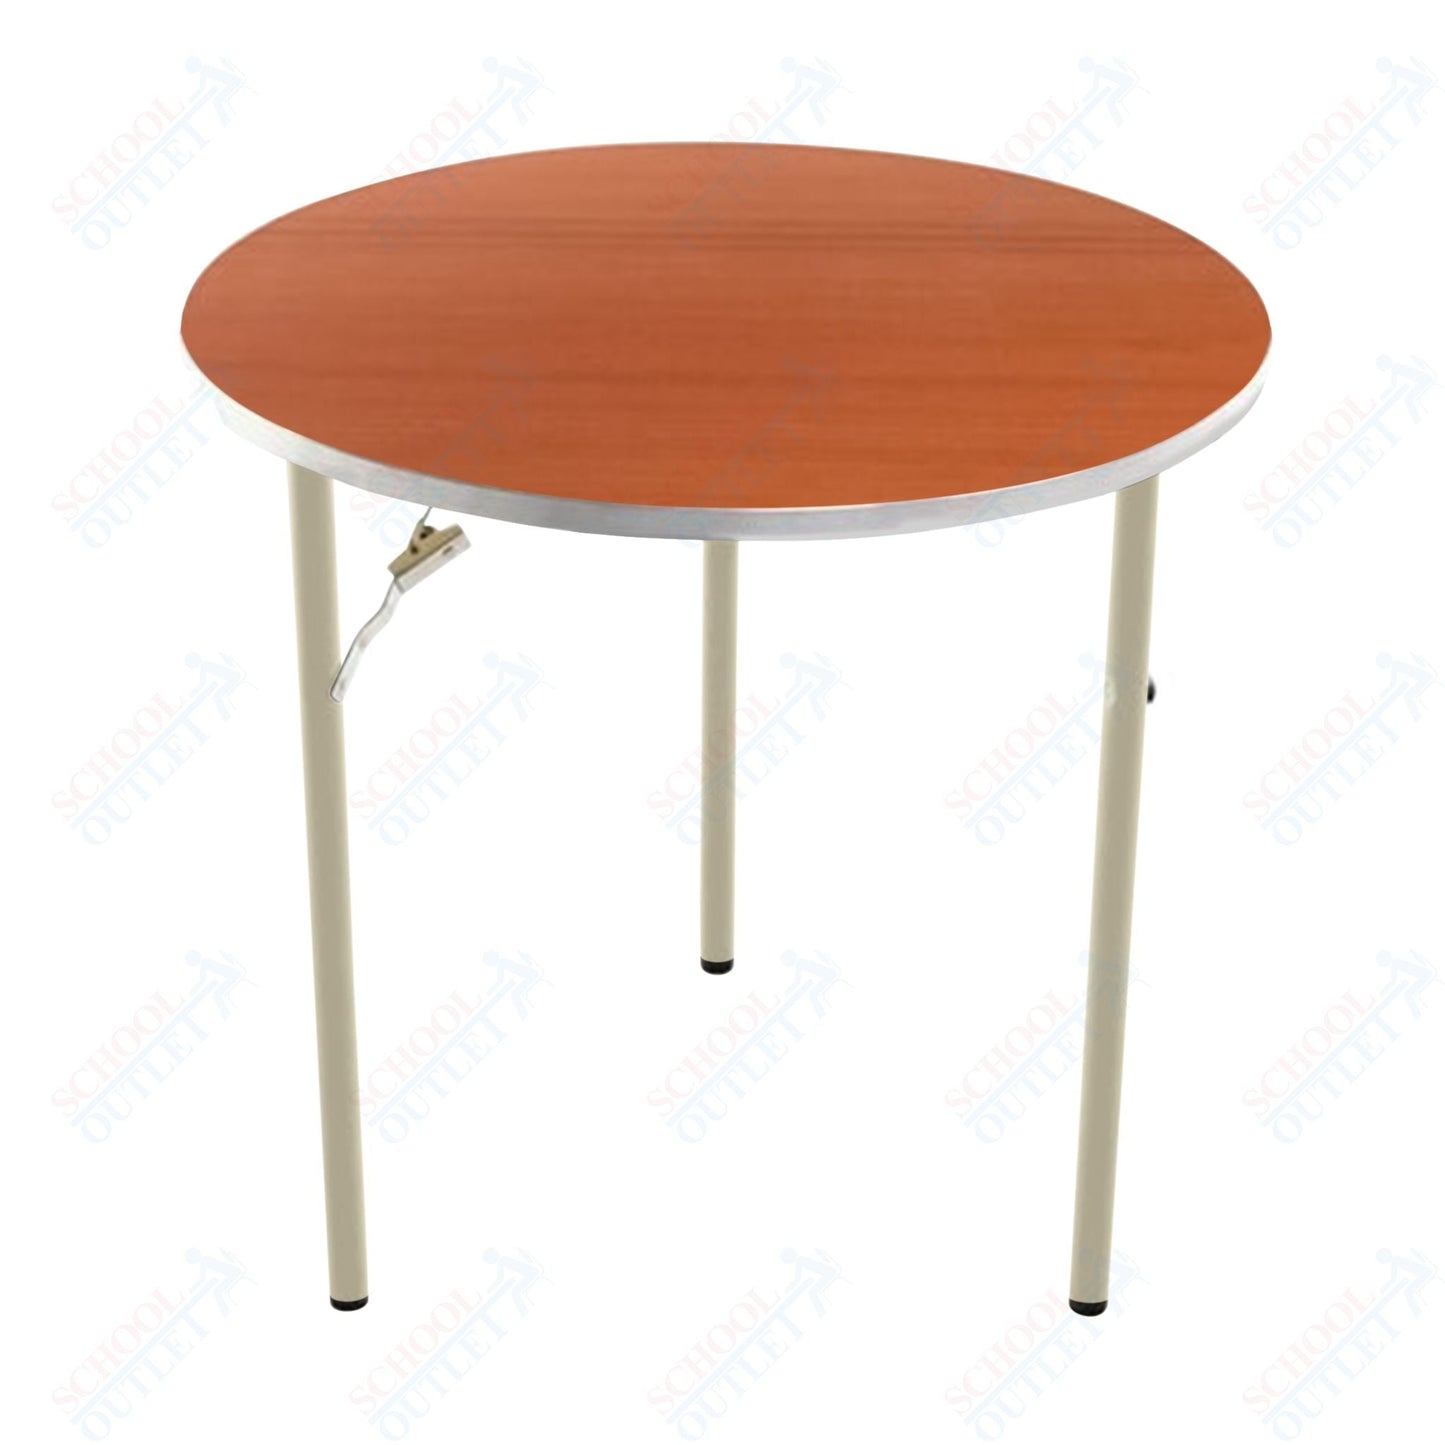 AmTab Folding Table - Plywood Stained and Sealed - Aluminum Edge - Round - 60" Diameter x 29"H (AmTab AMT - R60PA) - SchoolOutlet